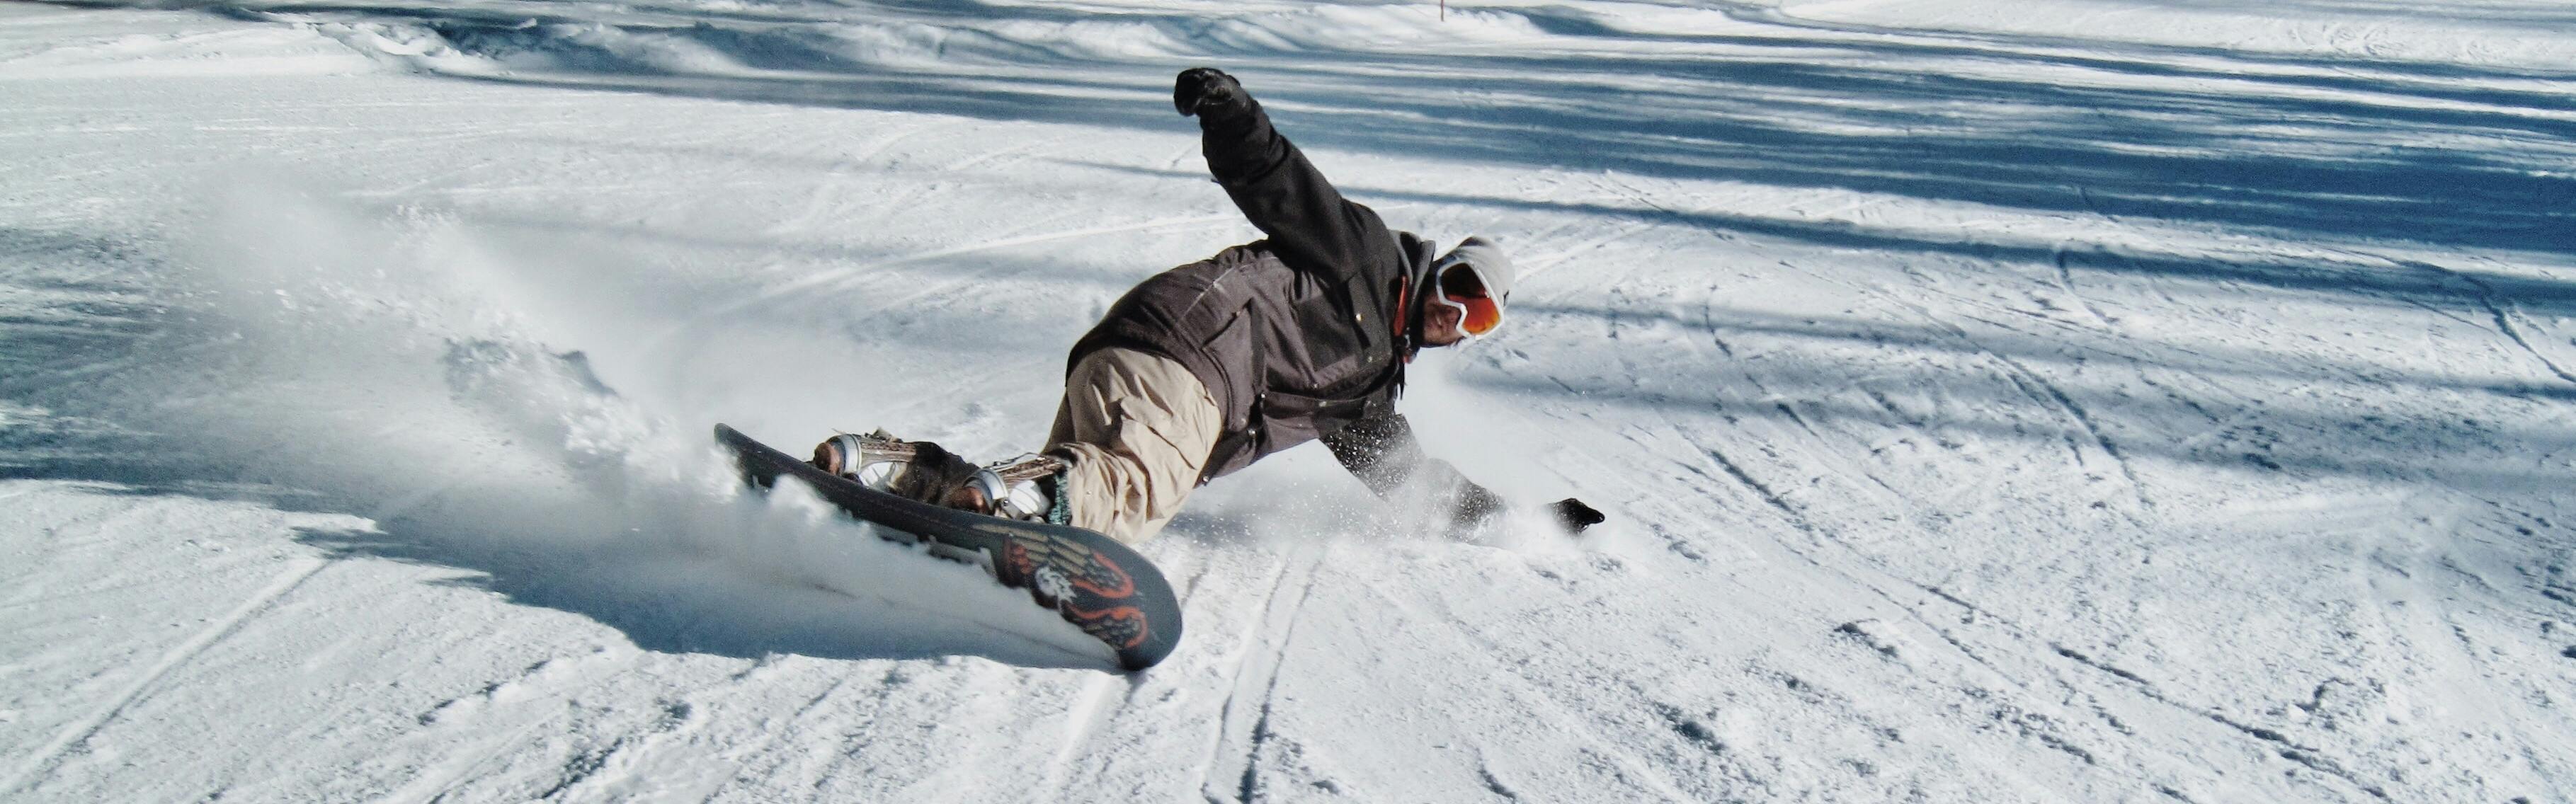 A snowboarder executes a hard turn